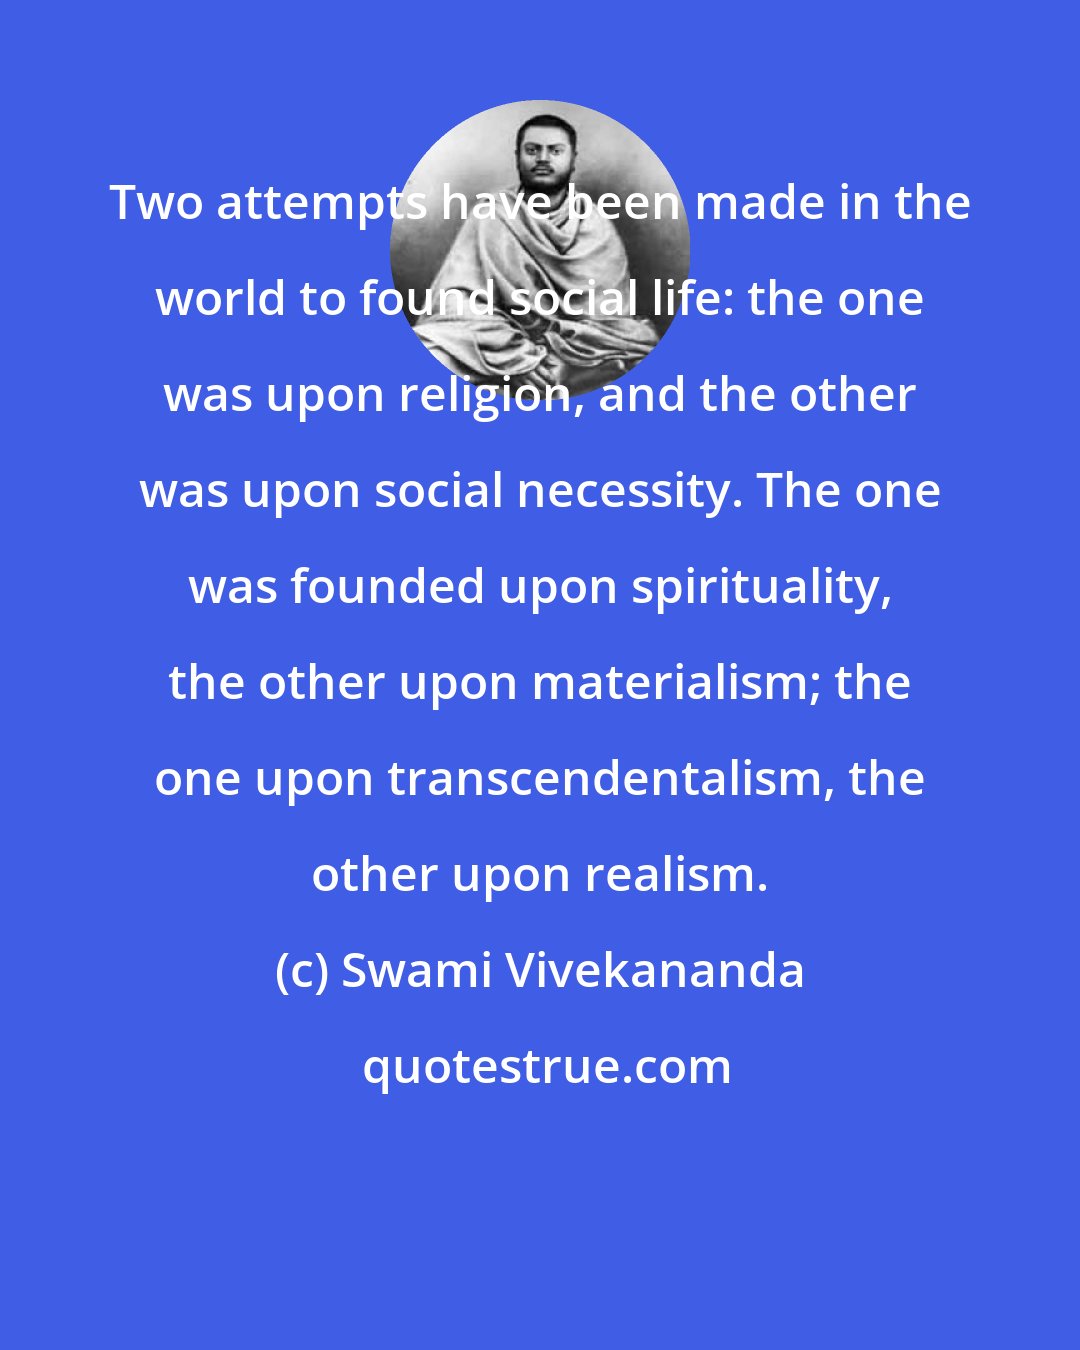 Swami Vivekananda: Two attempts have been made in the world to found social life: the one was upon religion, and the other was upon social necessity. The one was founded upon spirituality, the other upon materialism; the one upon transcendentalism, the other upon realism.